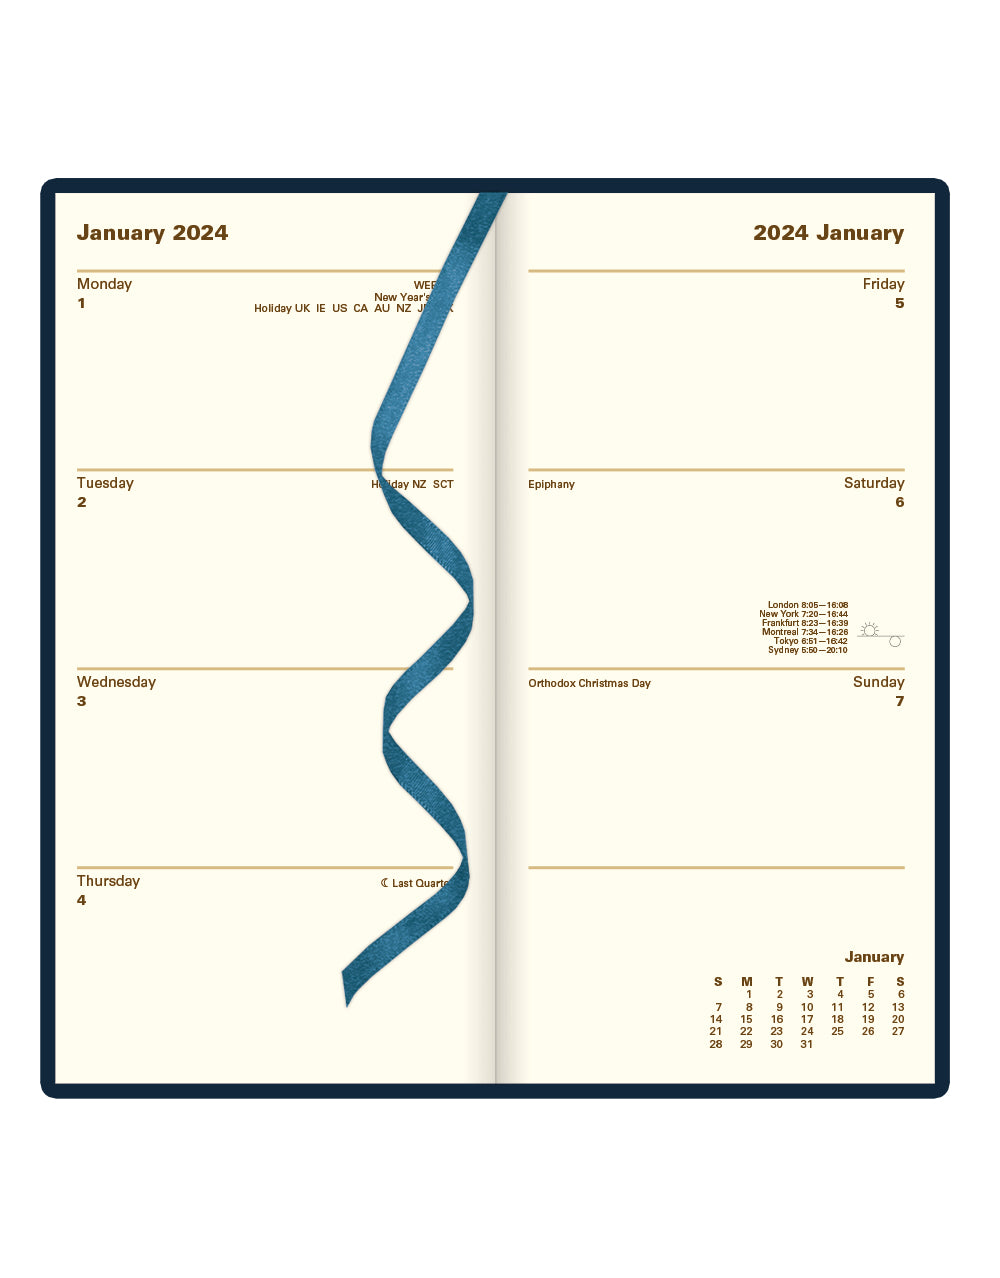 Signature Slim Week to View Leather Diary with Planners 2024 - English#colour_blue